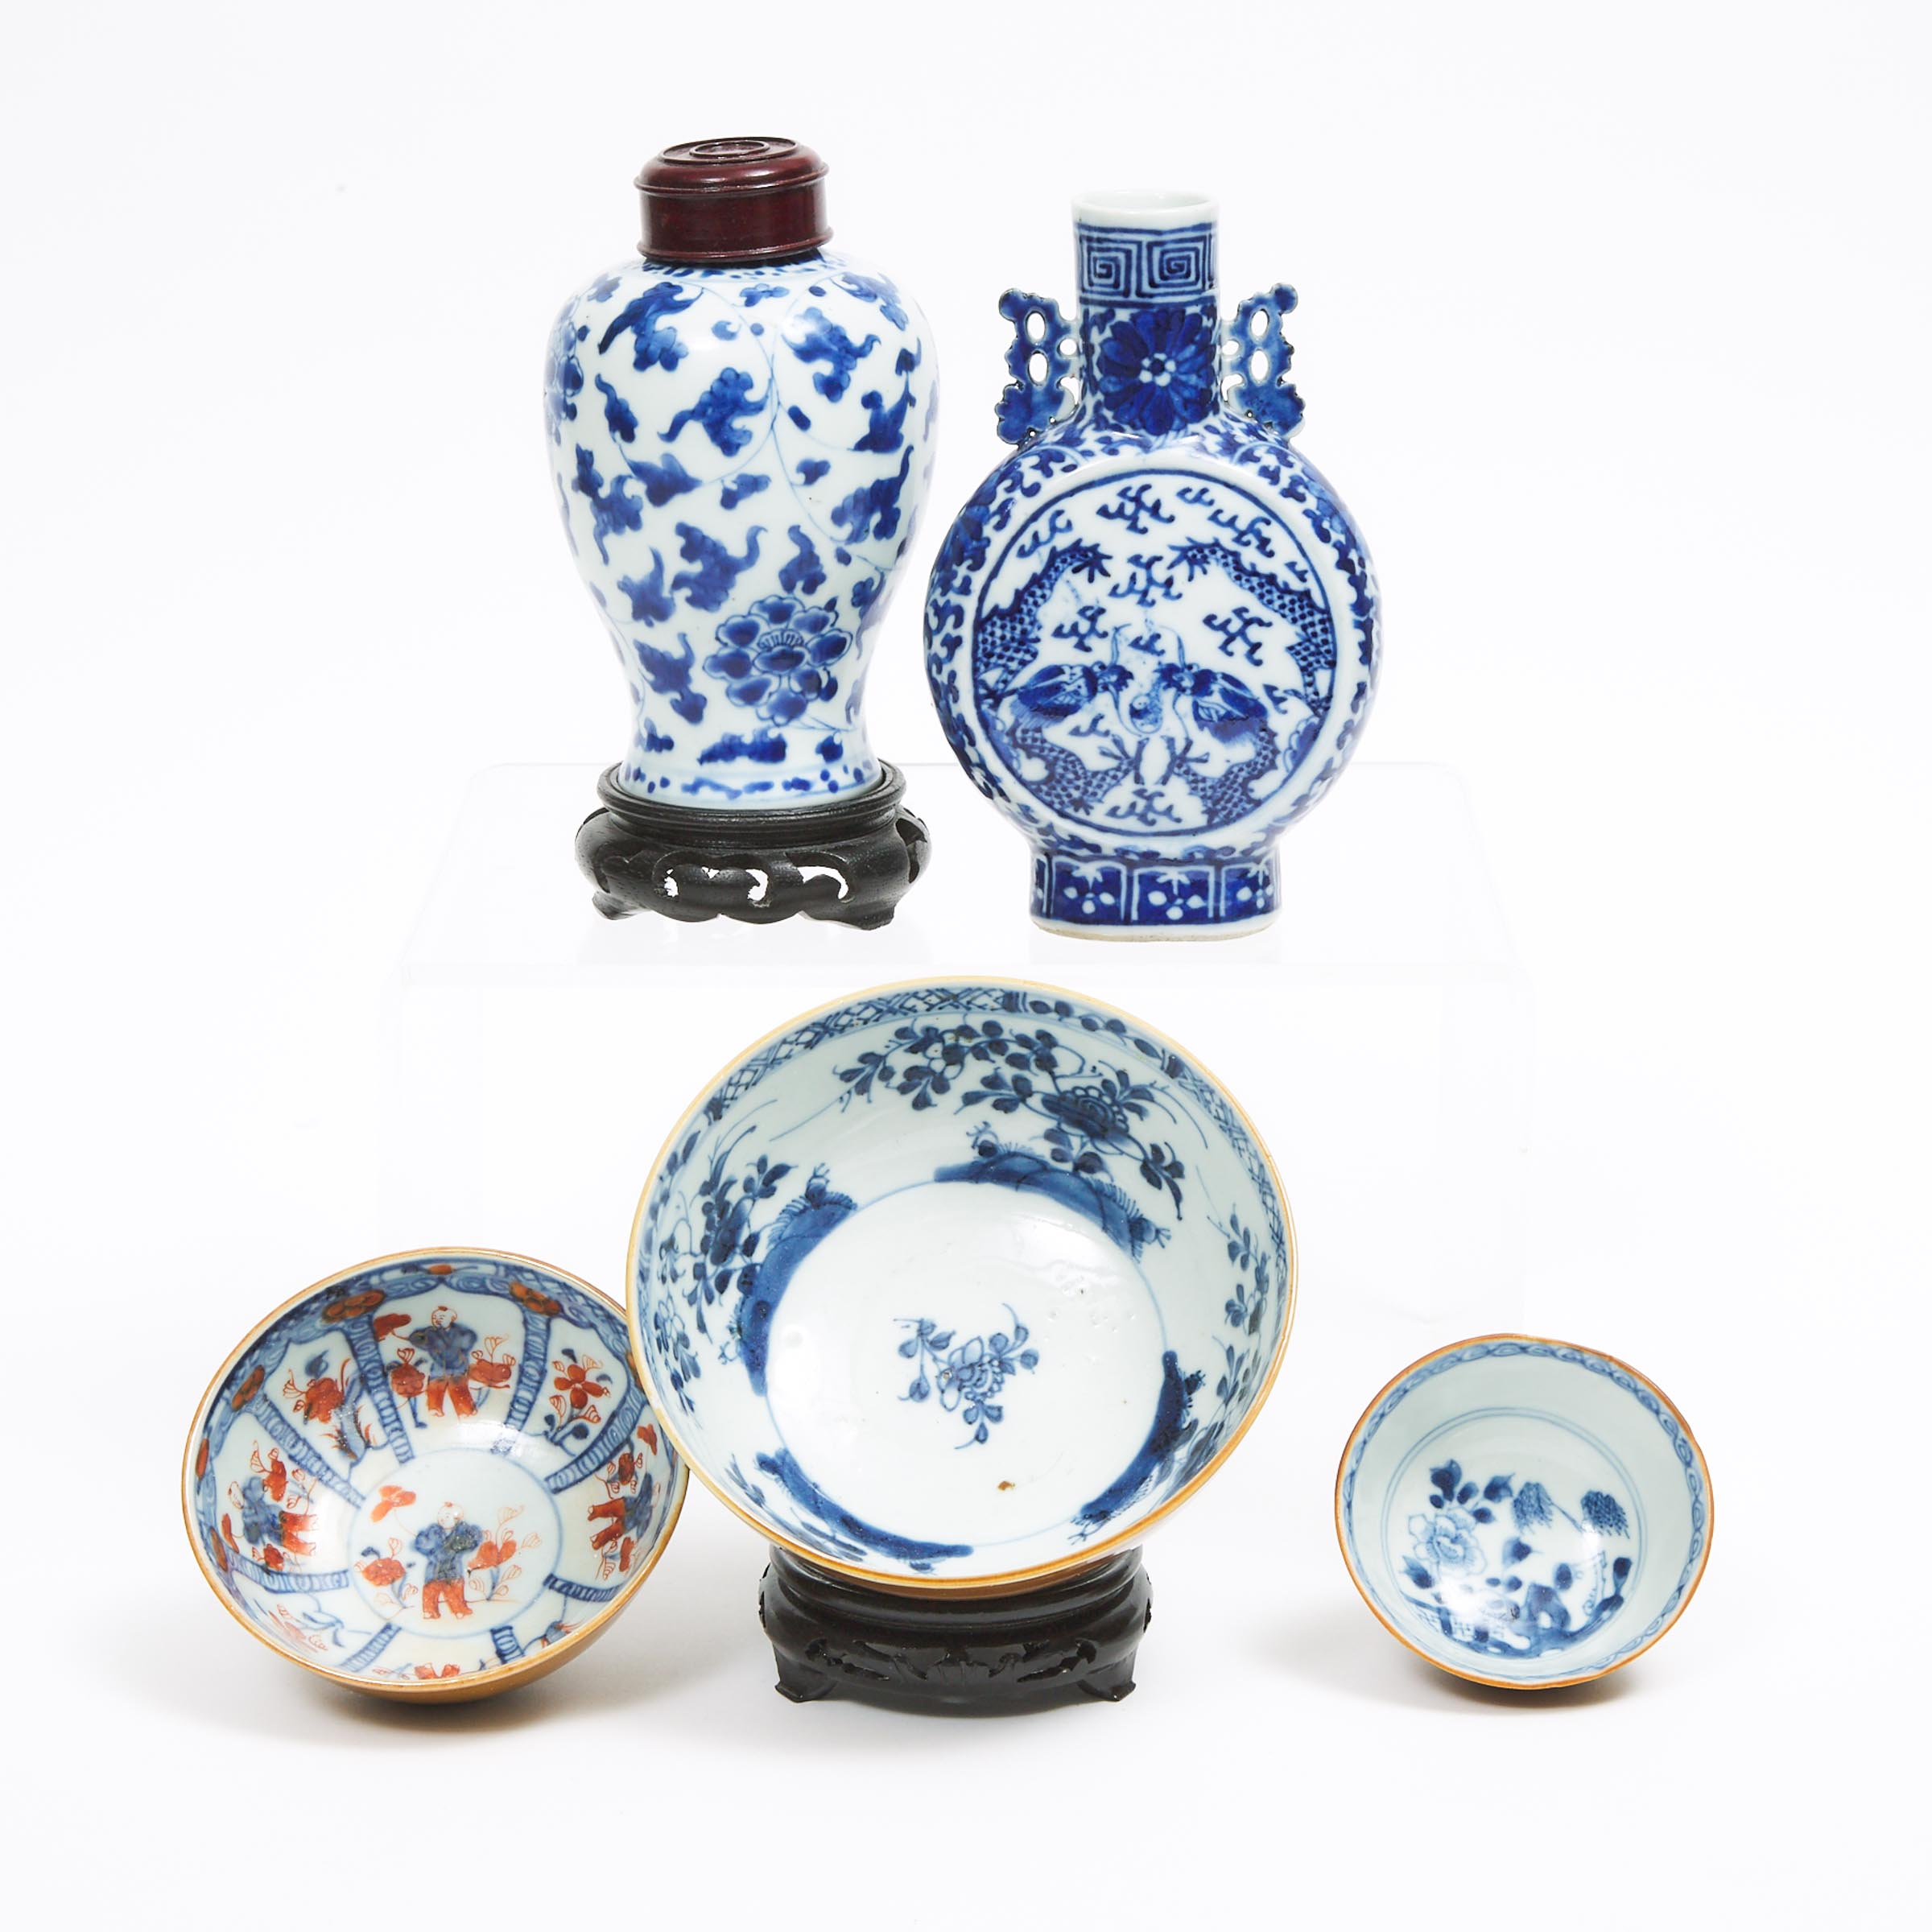 A Group of Five Blue and White Porcelain Wares, 18th Century and Later